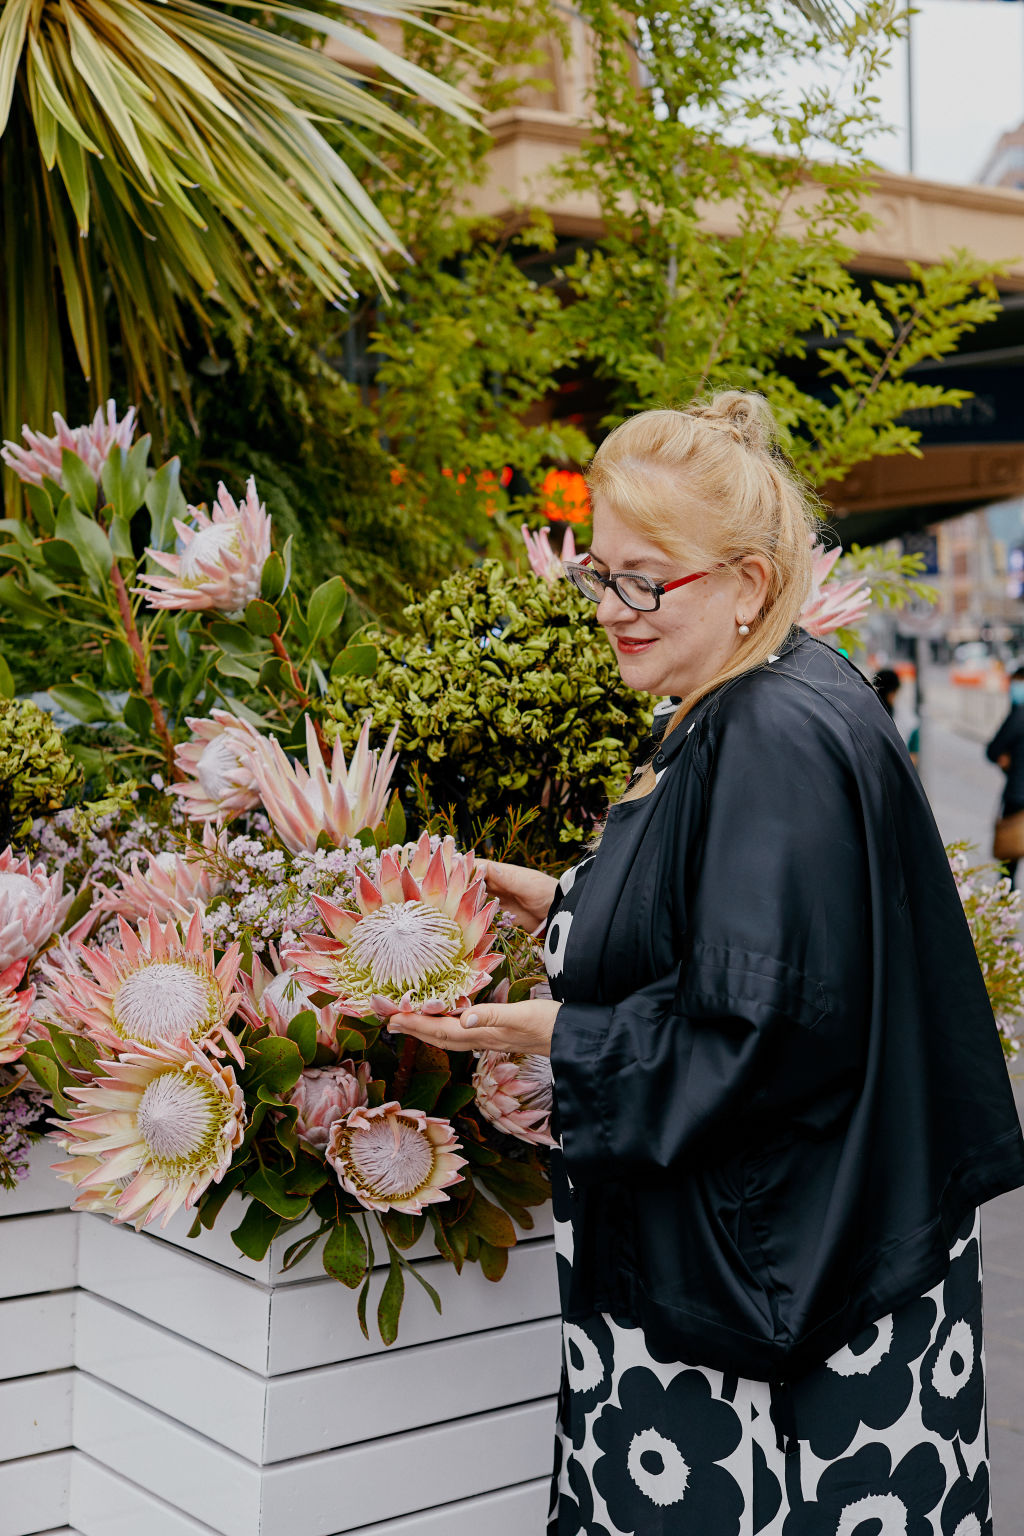 Flowers Vasette's founder and managing director Cherrie Miriklis-Pavlou, who is celebrating her florist's 30th anniversary, chose the colours and stems to represent hope and newfound vibrancy after lockdown. Photo: Amelia Stanwix Photography.